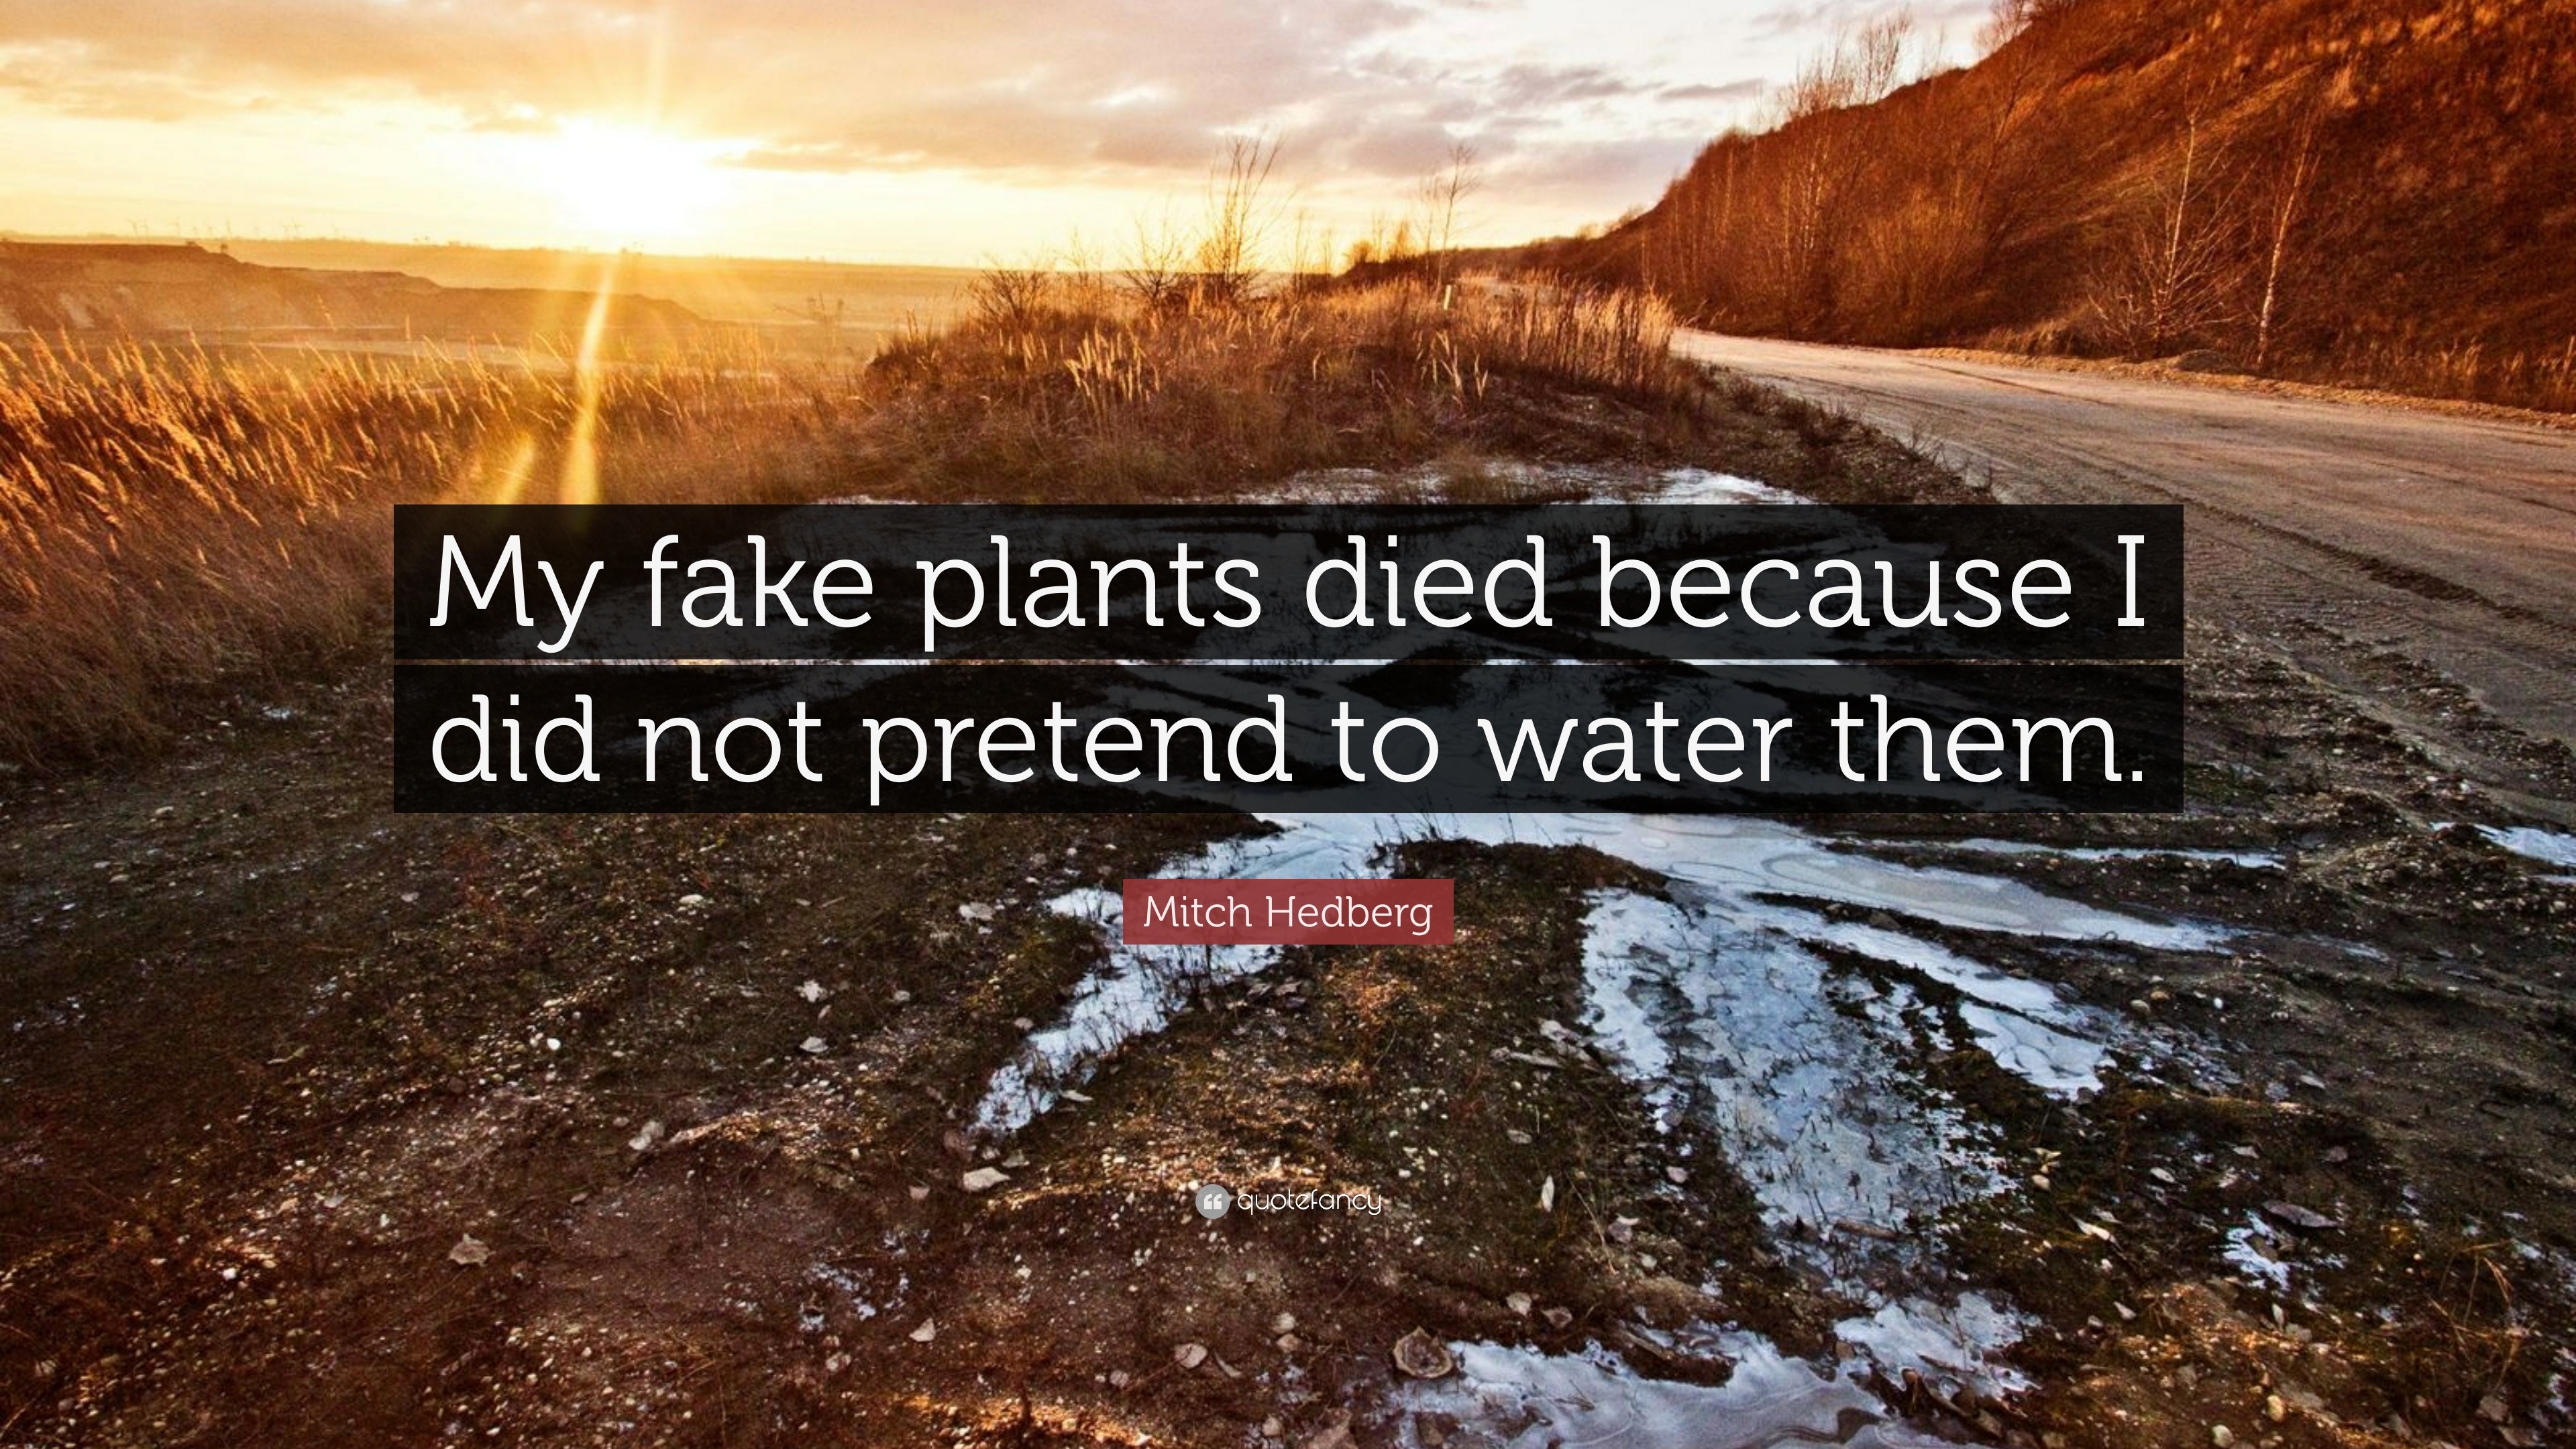 Mitch Hedberg Quote: “My fake plants died because I did not pretend to ...